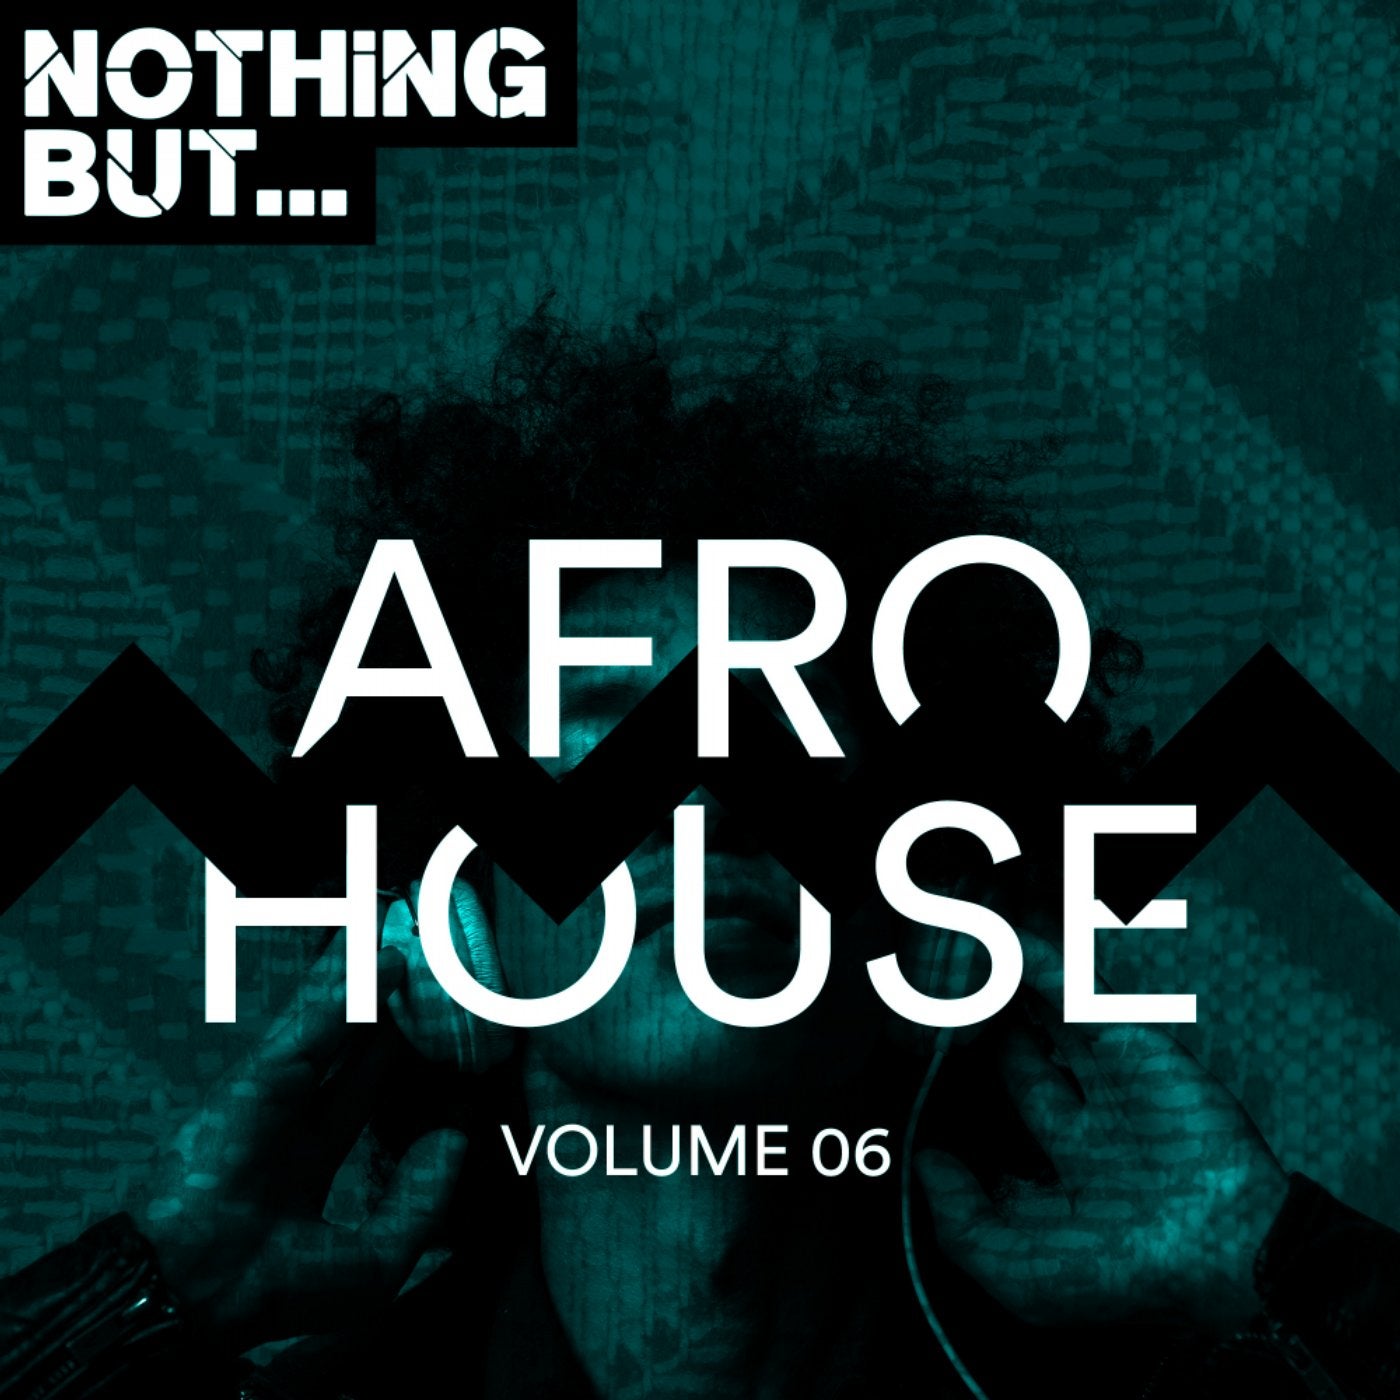 Nothing But... Afro House, Vol. 06